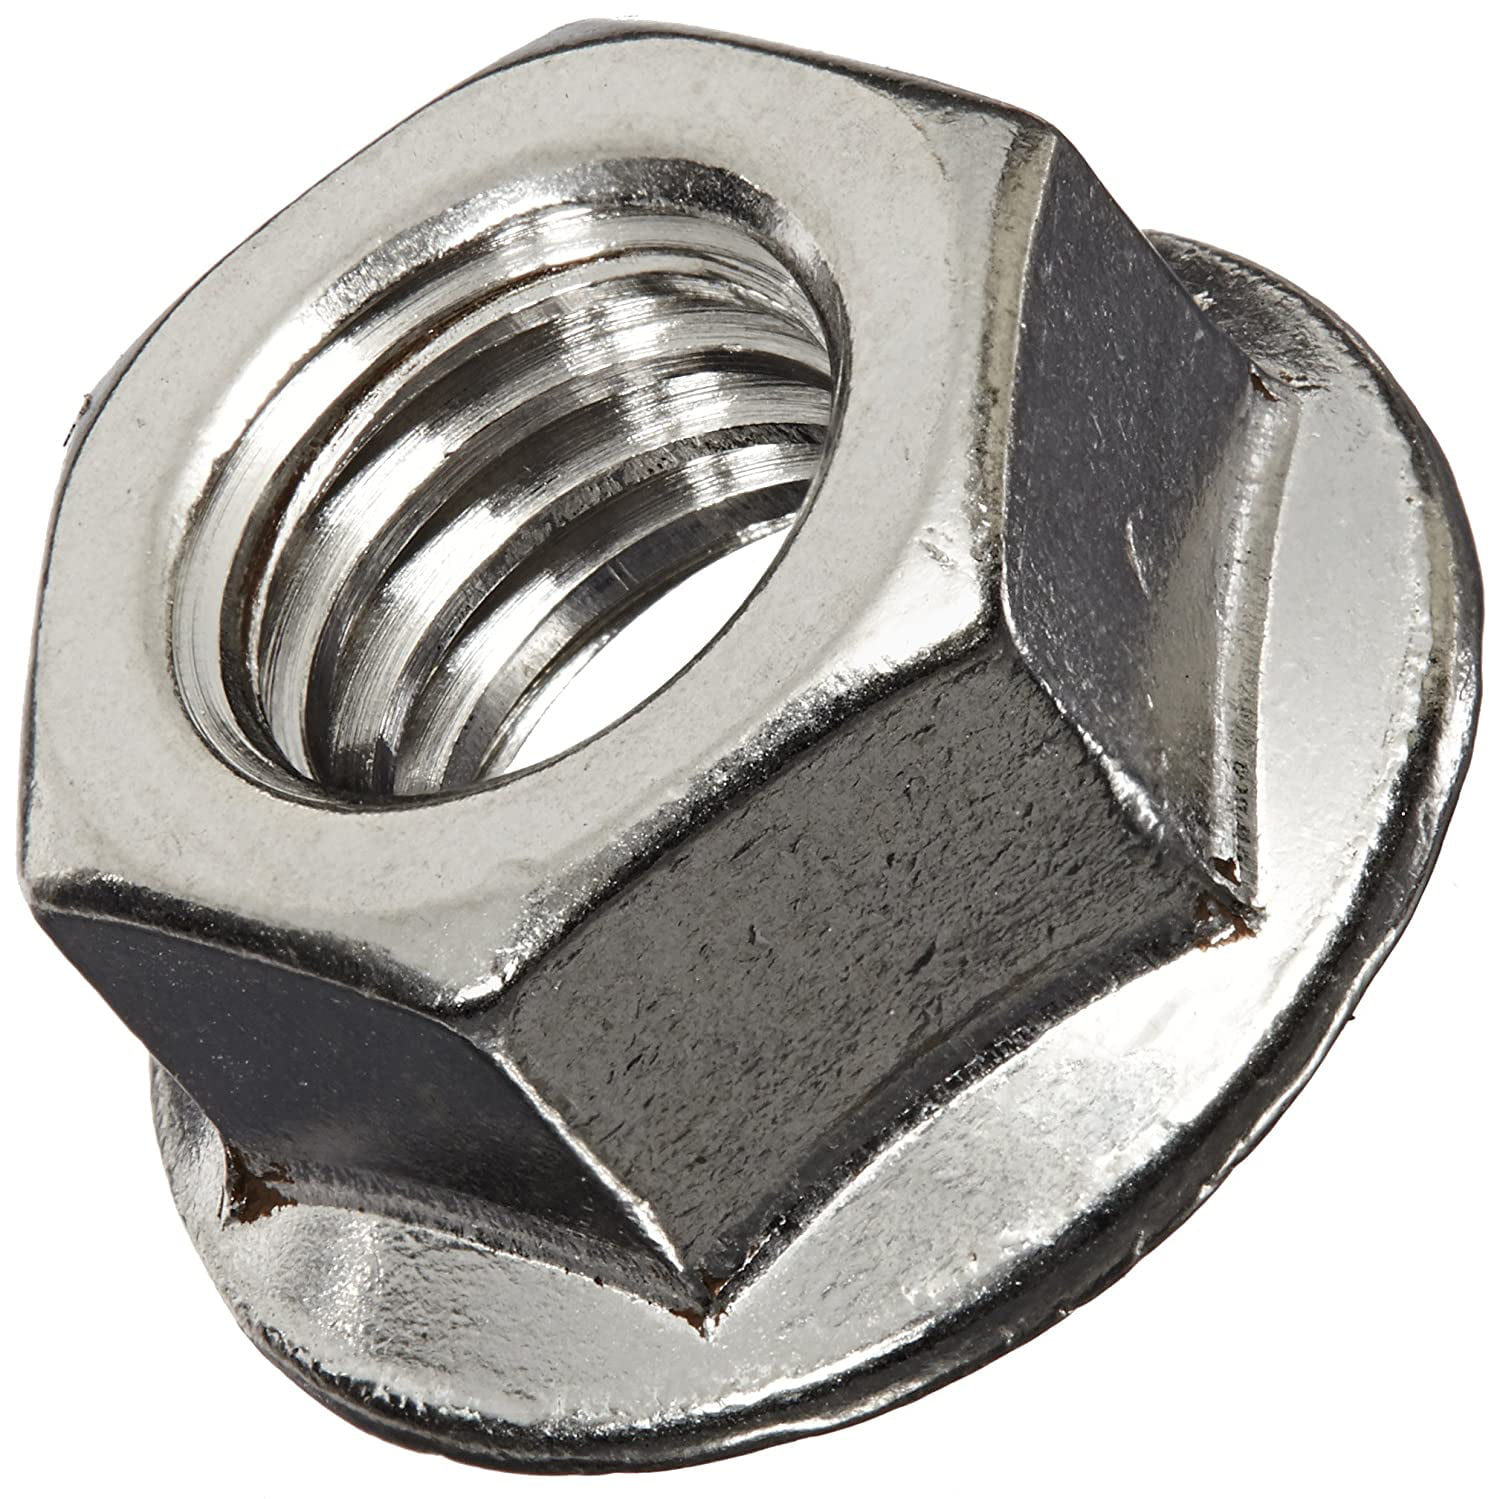 5/16-24 Stainless Steel Flange Nuts Serrated Base Lock Anti Vibration Qty 10 